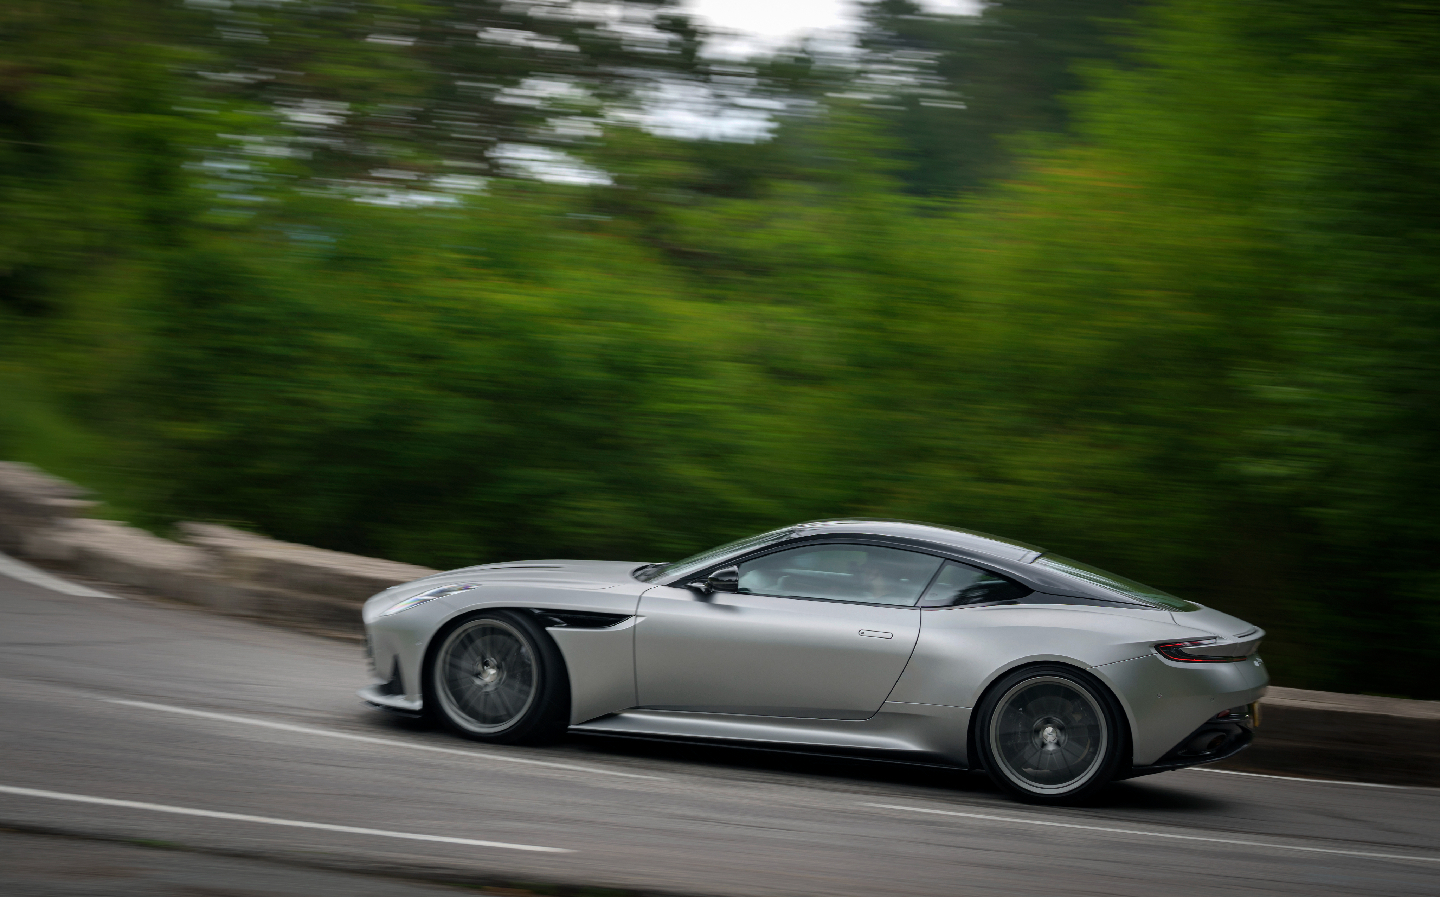 Aston Martin DB12 08 - Driving.co.uk from The Sunday Times